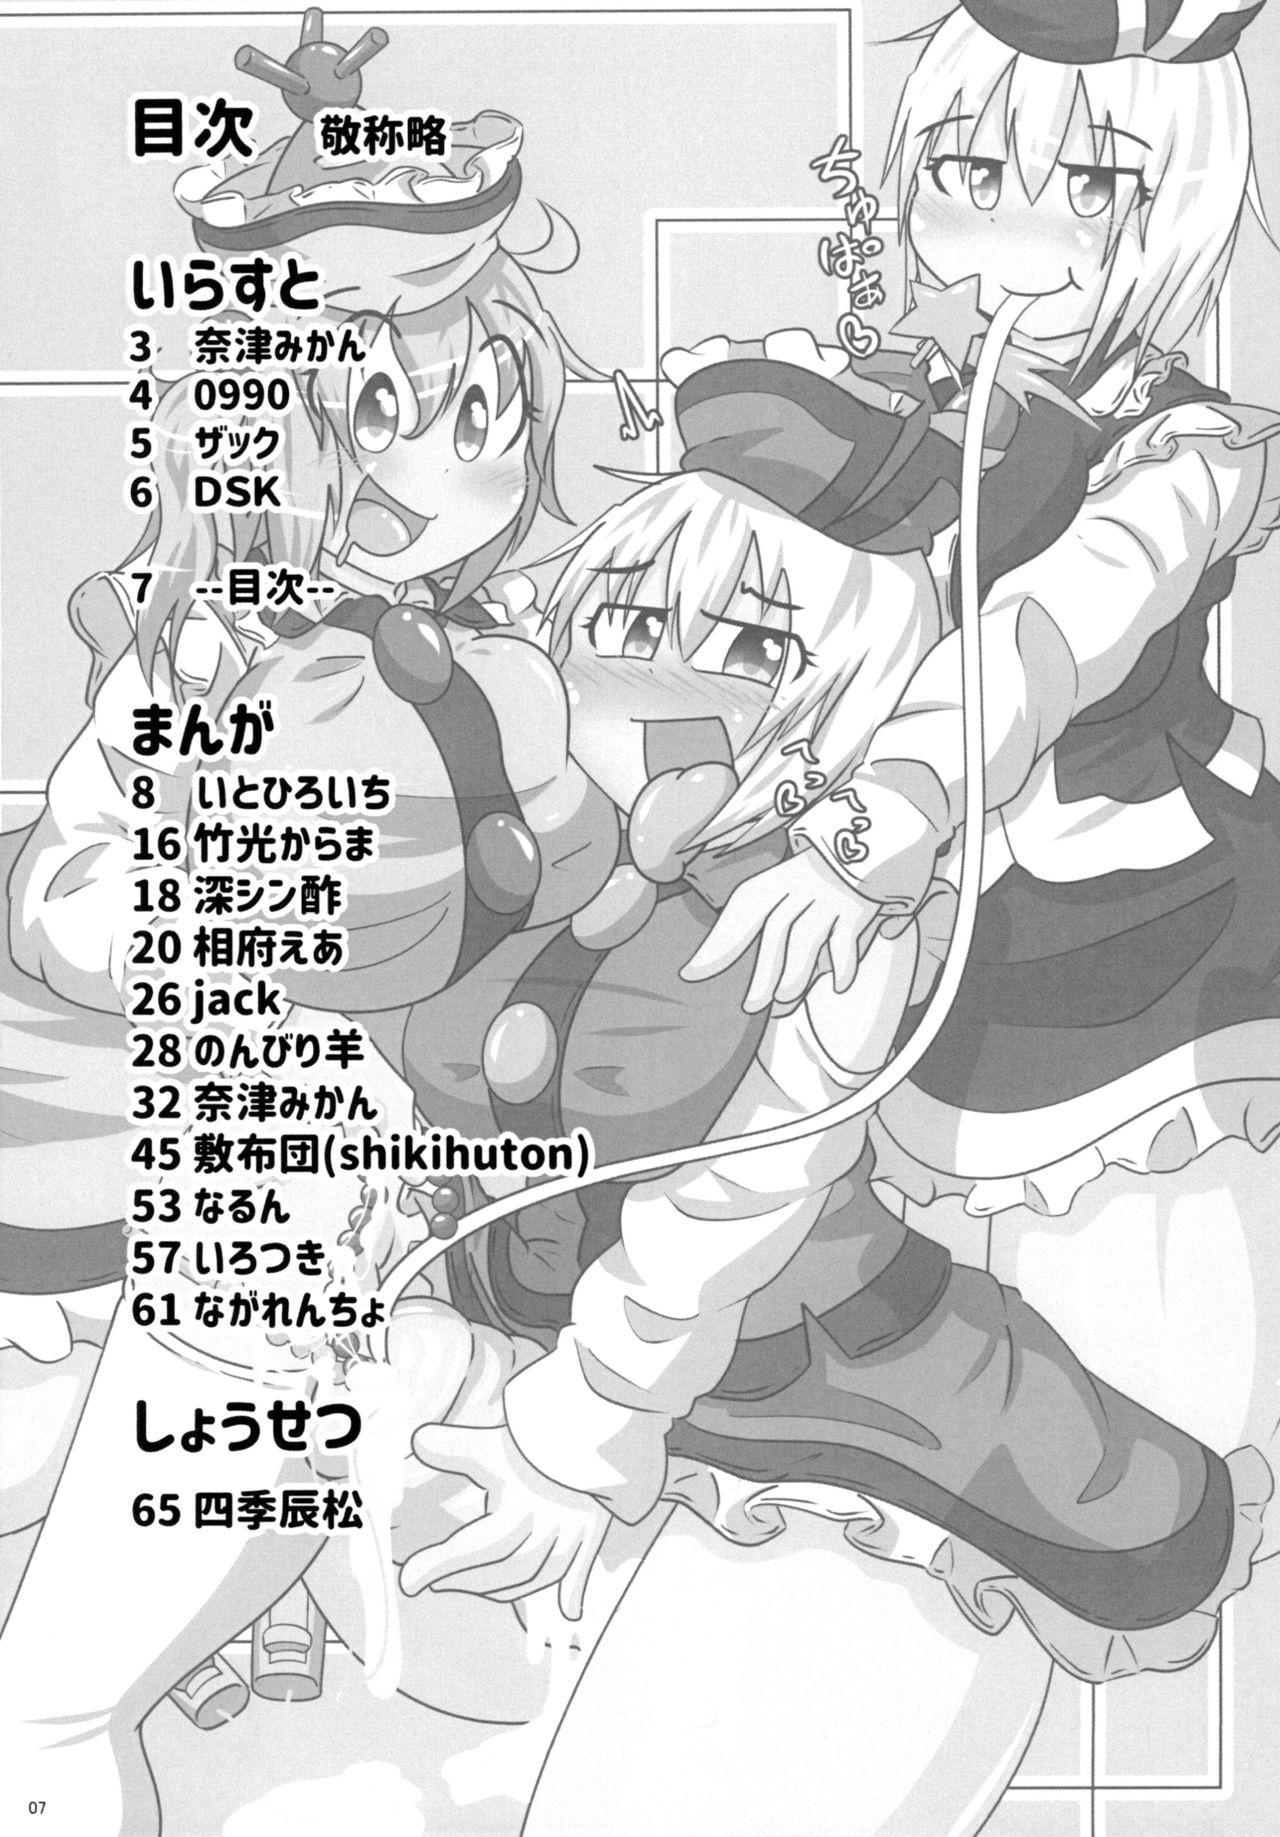 Boquete 東方おちんちん尿道責め合同 - Touhou project Underwear - Page 7